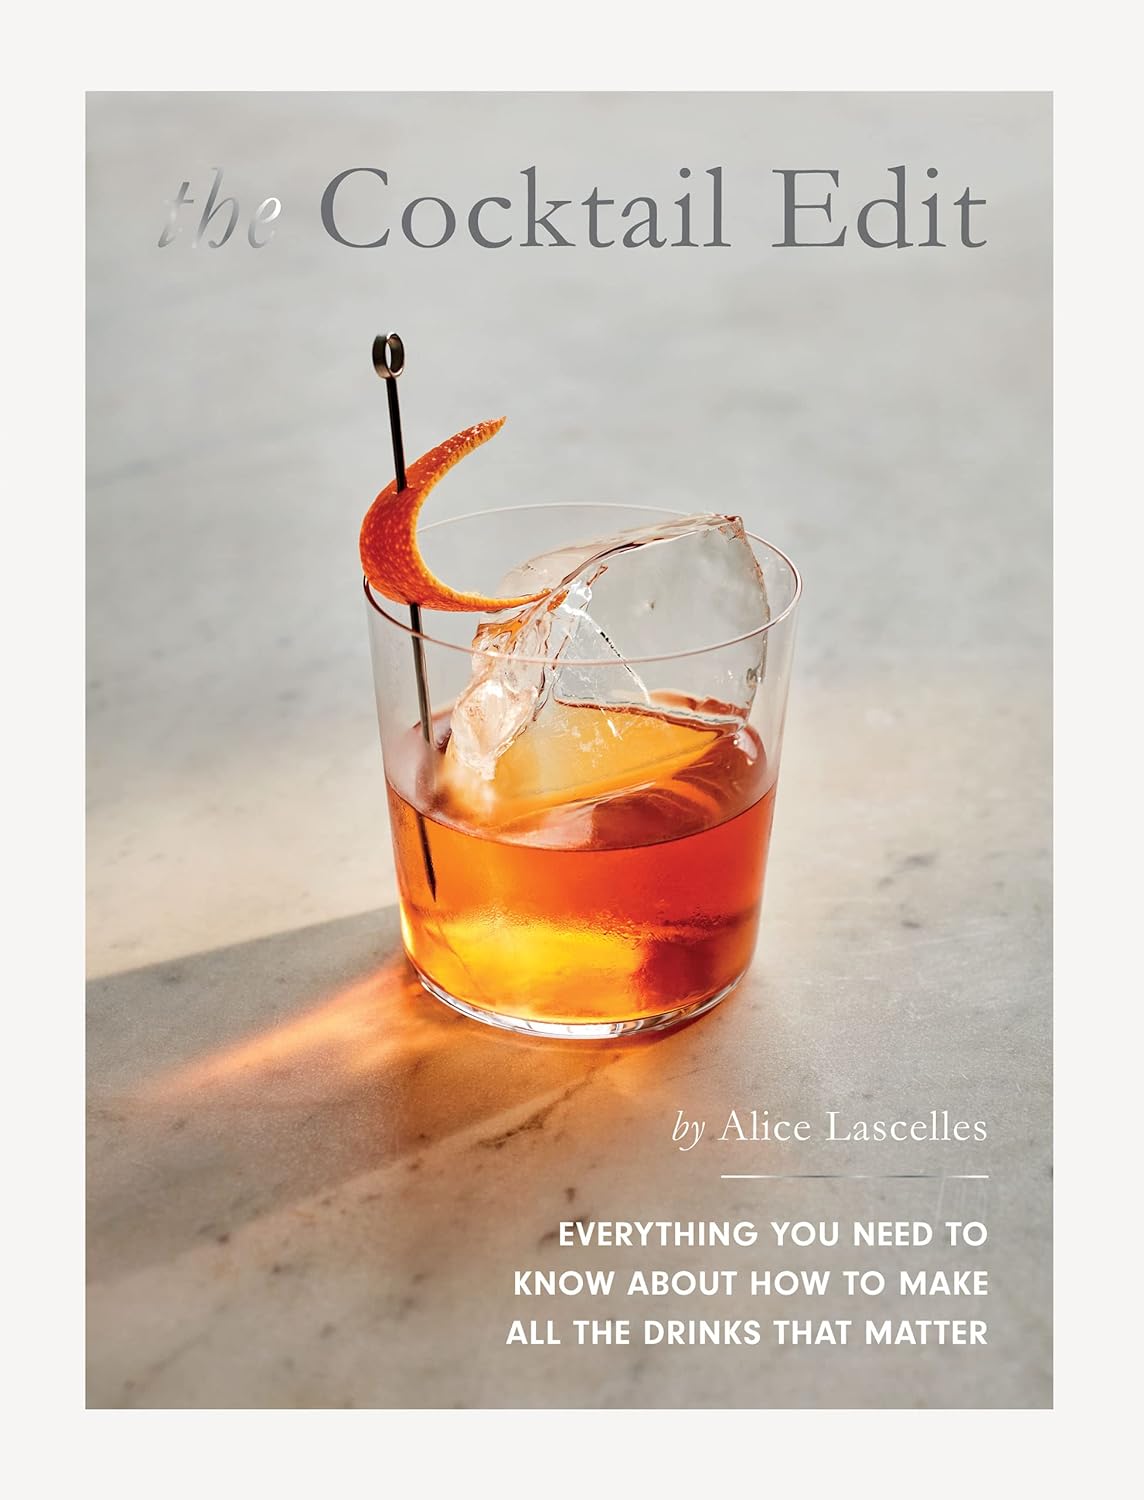 The Cocktail Edit : Everything You Need to Know About How to Make the Drinks That Matter